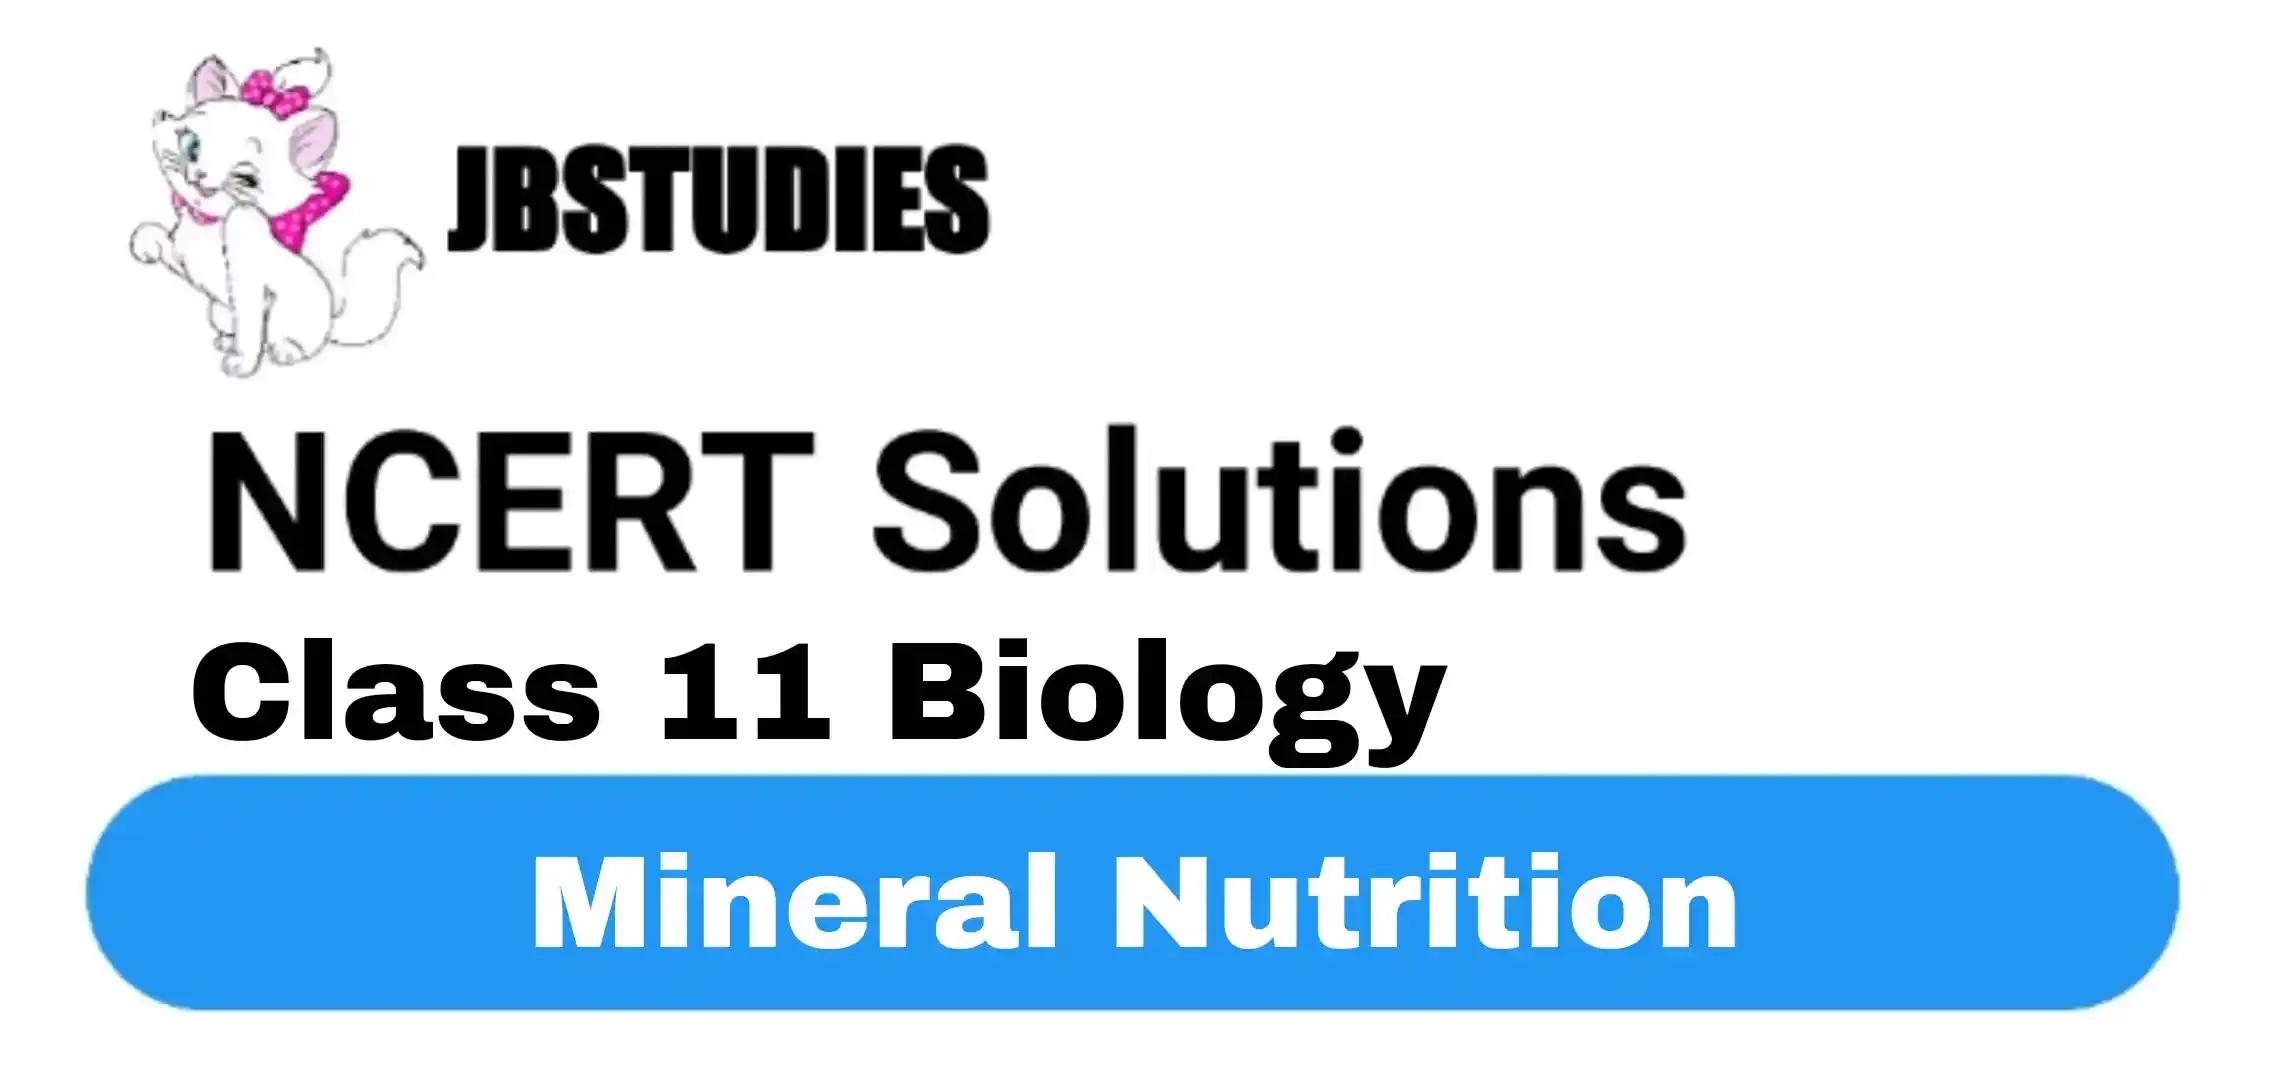 Solutions Class 11 Biology Chapter -12 (Mineral Nutrition)